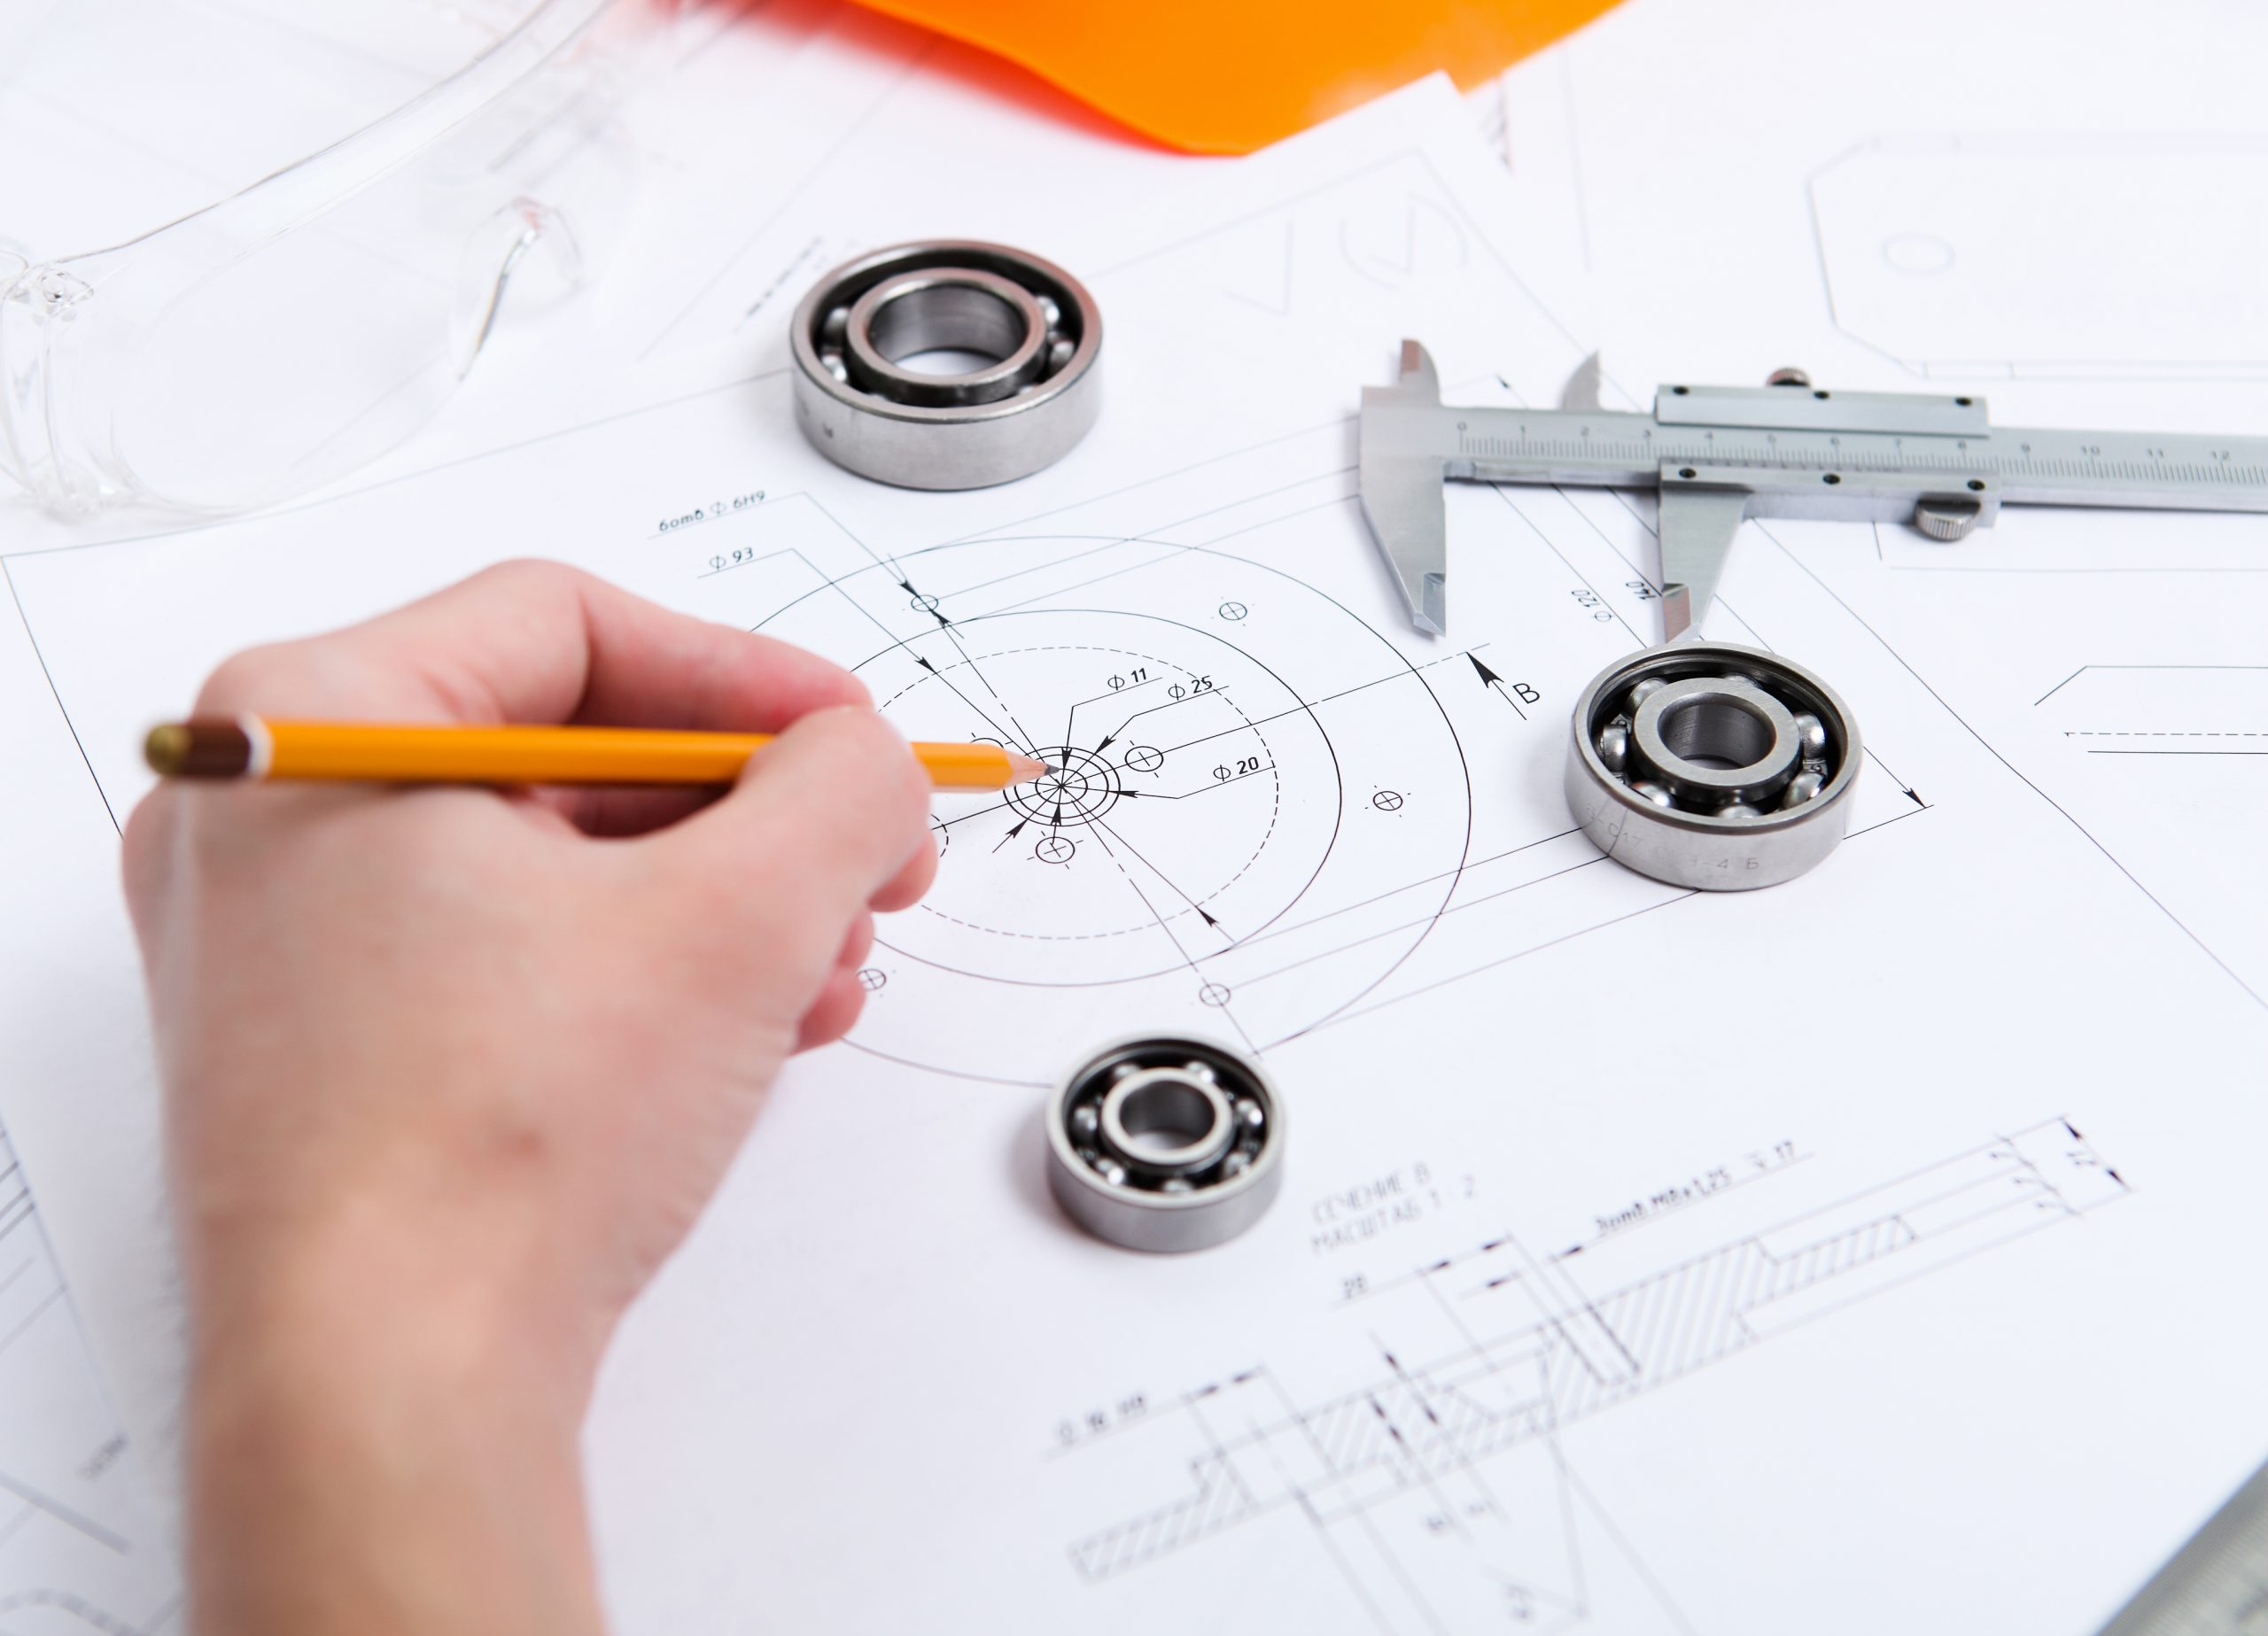 Mechanical Design and Materials